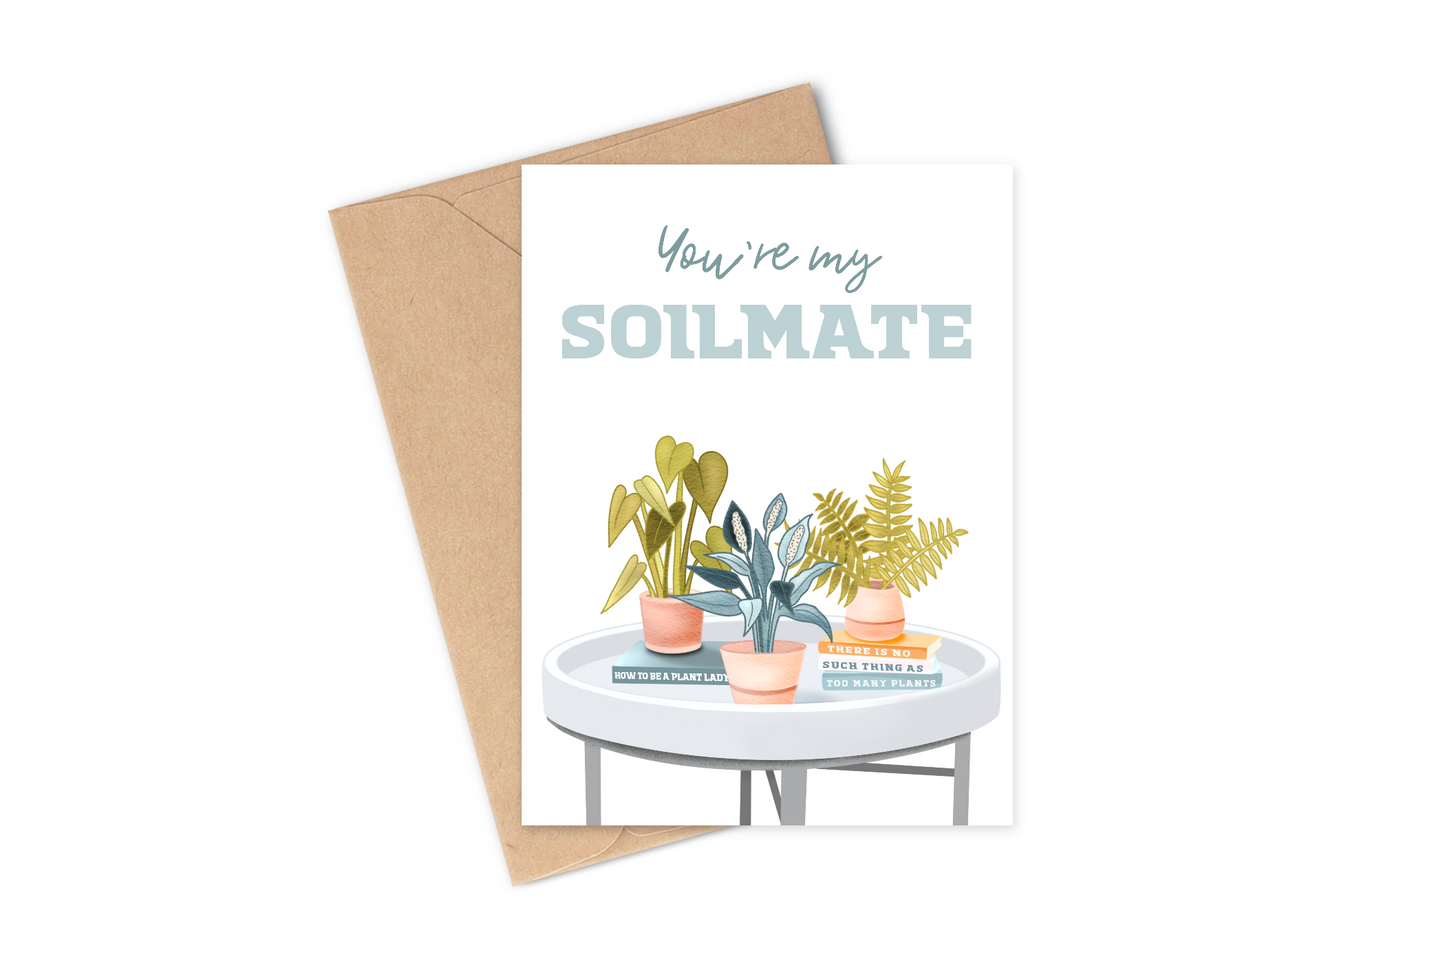 The perfect card for... your soilmate! I mean... soulmate! This card is sure to make any plant-love smile.     Details: Hand-illustrated drawing of 3 potted plants sitting atop a coffee table with books. The main text says "You're my soilmate" and there are some cute hidden messages on the books. The ones on the right say 'there is no such thing as too many plants' and on the left it says 'how to be a plant lady'. Your friend, family member or coworker is sure to love this card!